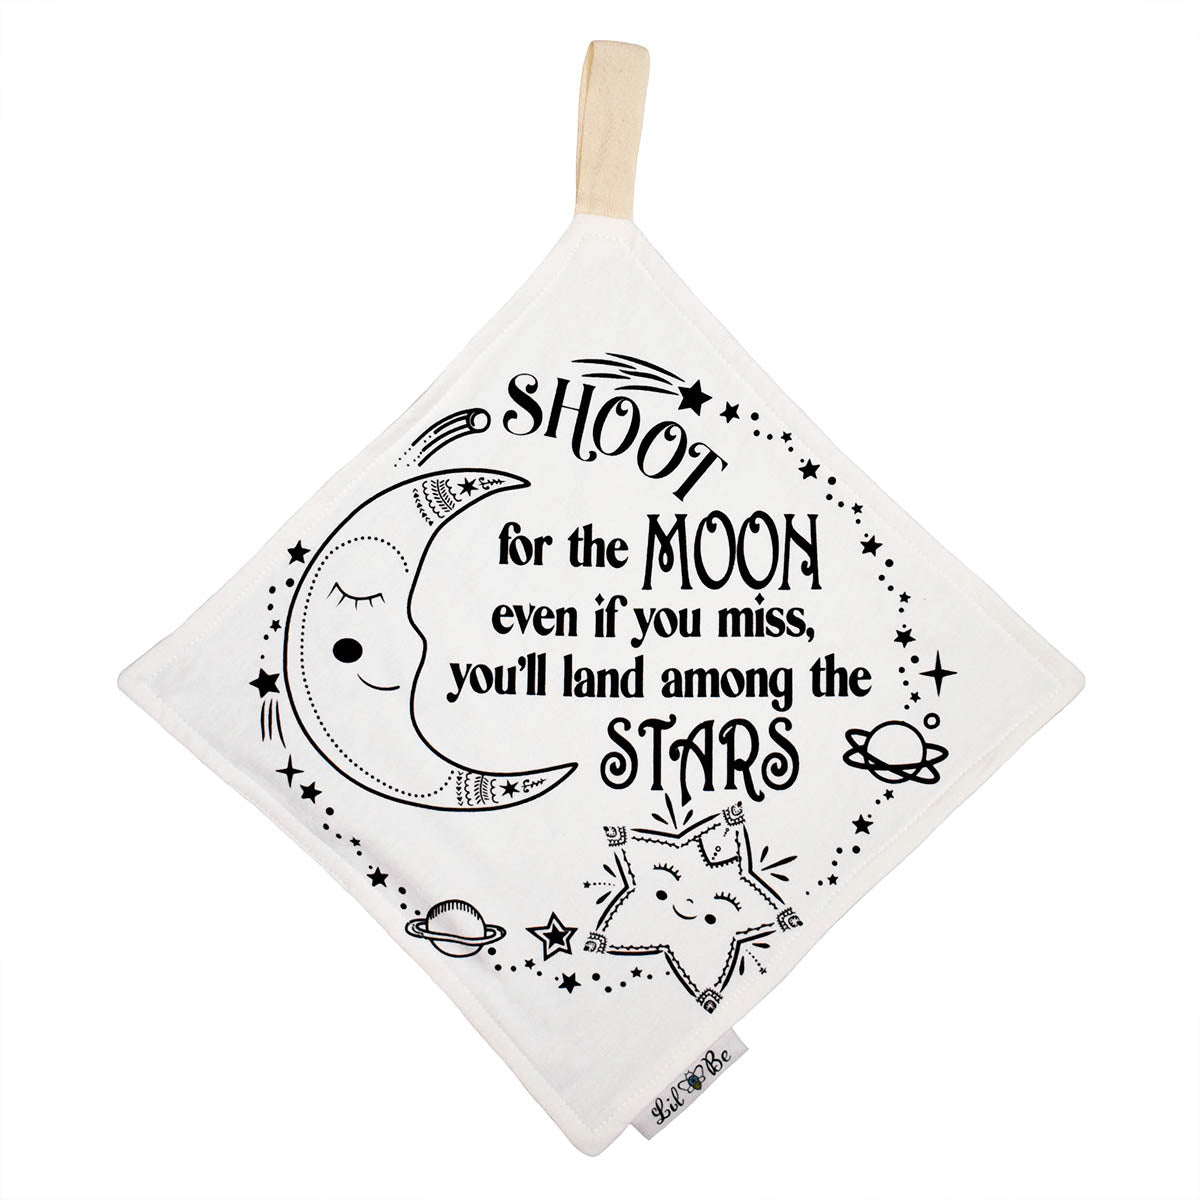 Mini Blanket with Moon and Star Saying "Shoot for the Moon even if you miss, you'll land among the Stars" Graphic with tag to attached to teether